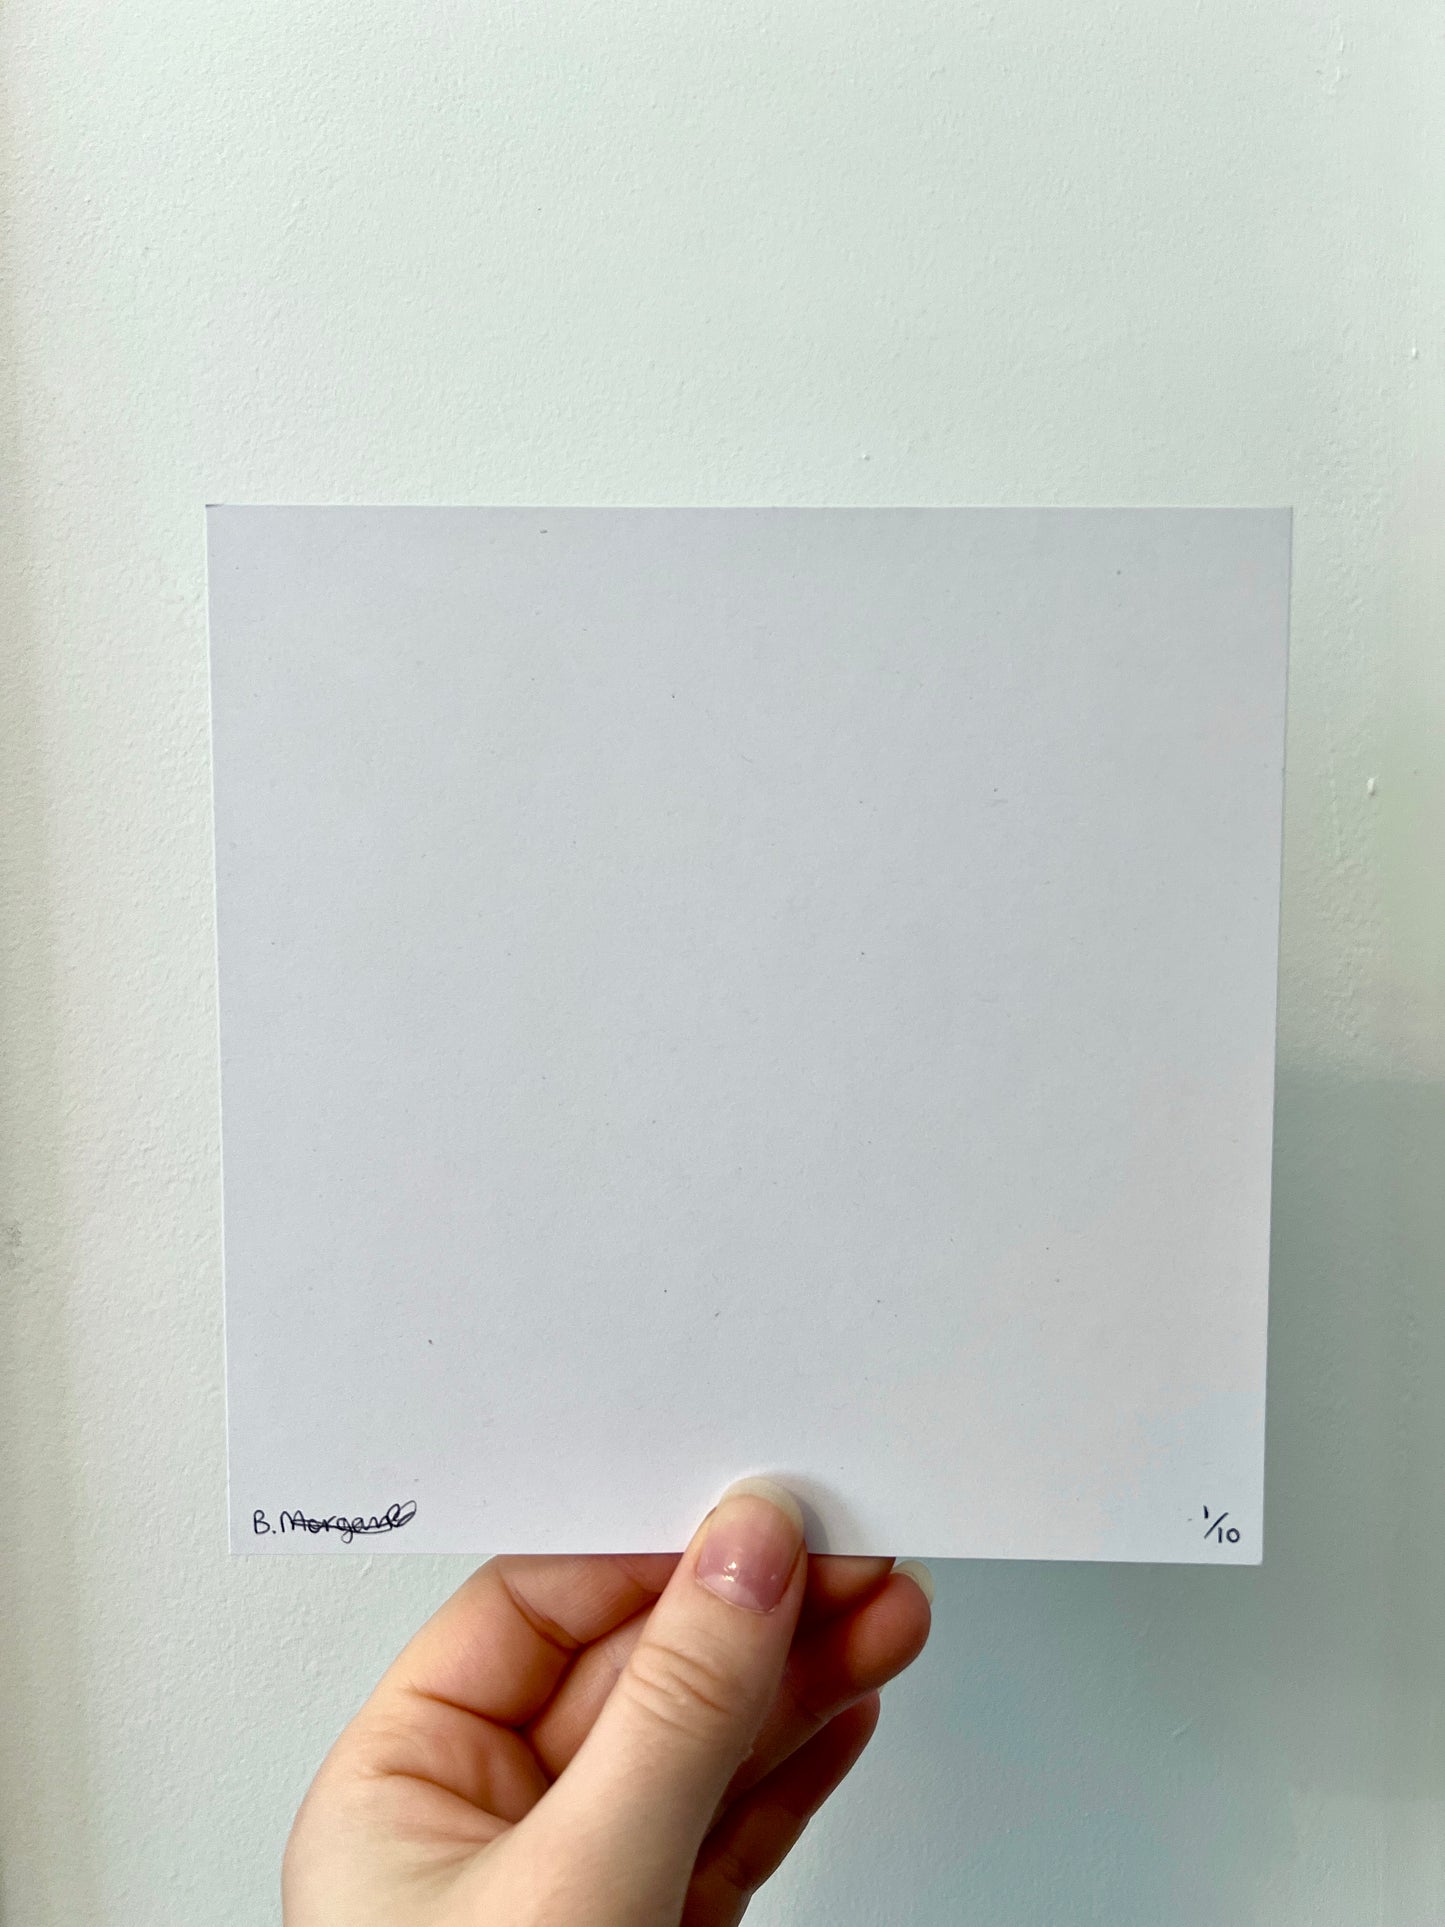 A hand holding the back of a print which is a white square, signed and numbered on the back by Beth Morgan.